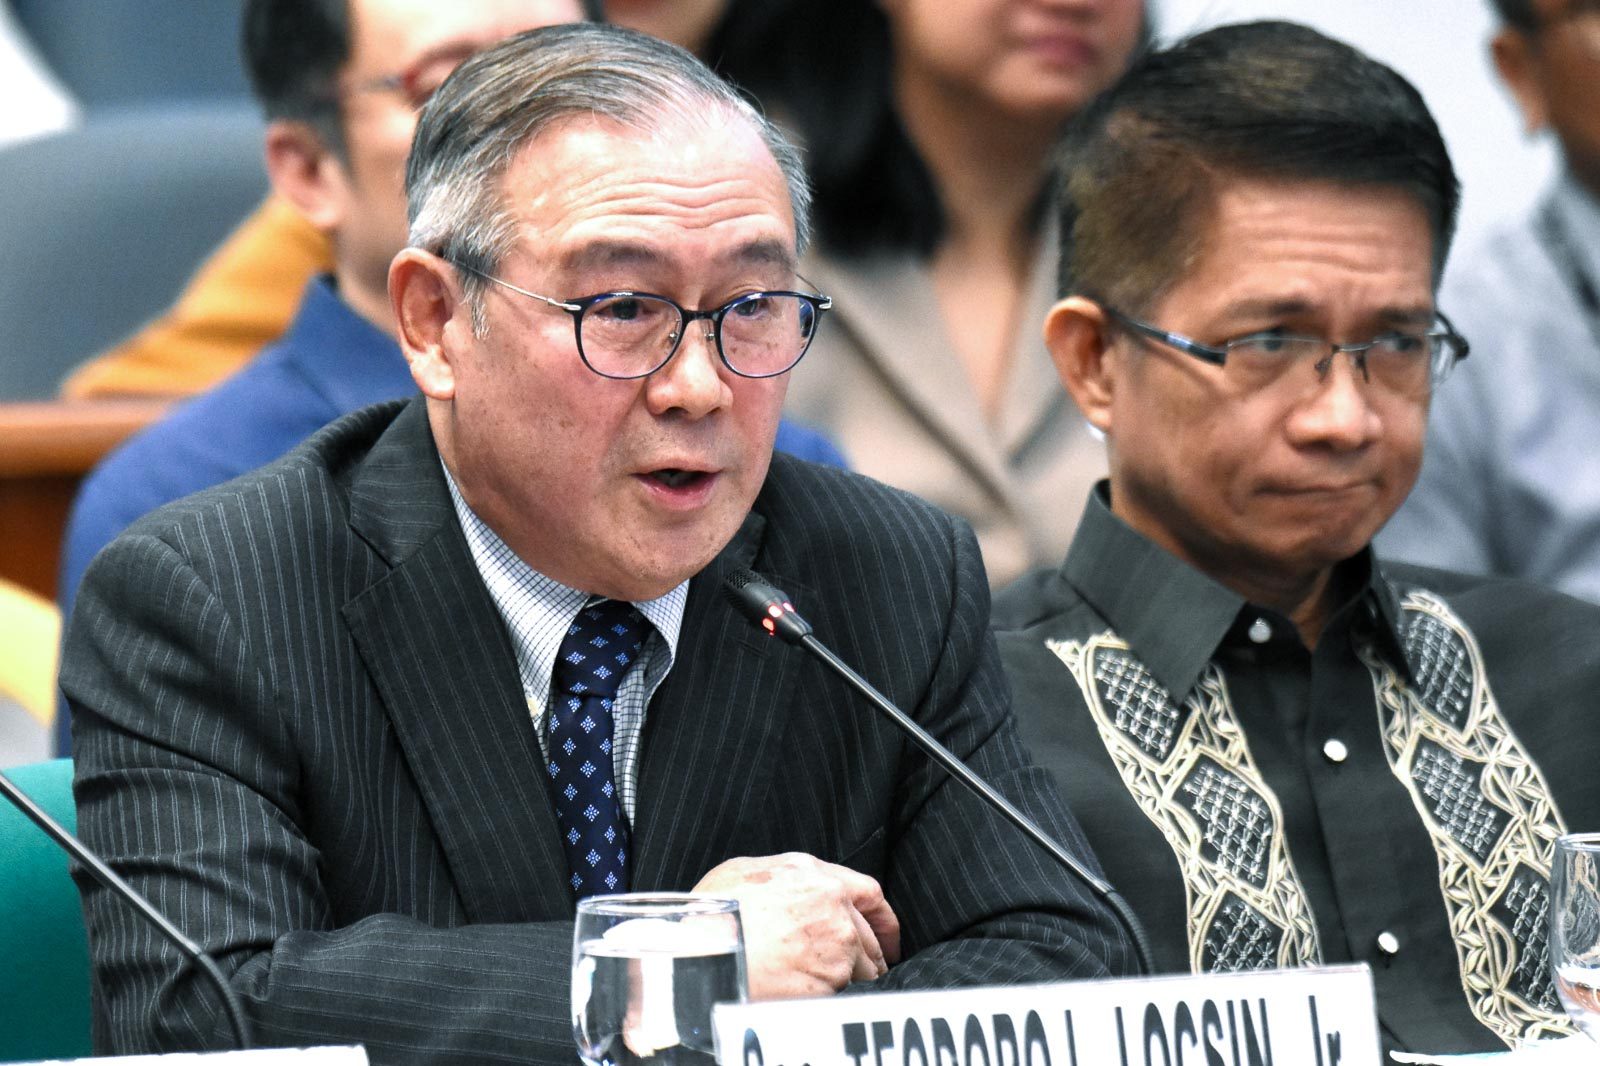 No termination yet: Locsin instead wants ‘vigorous review’ of VFA